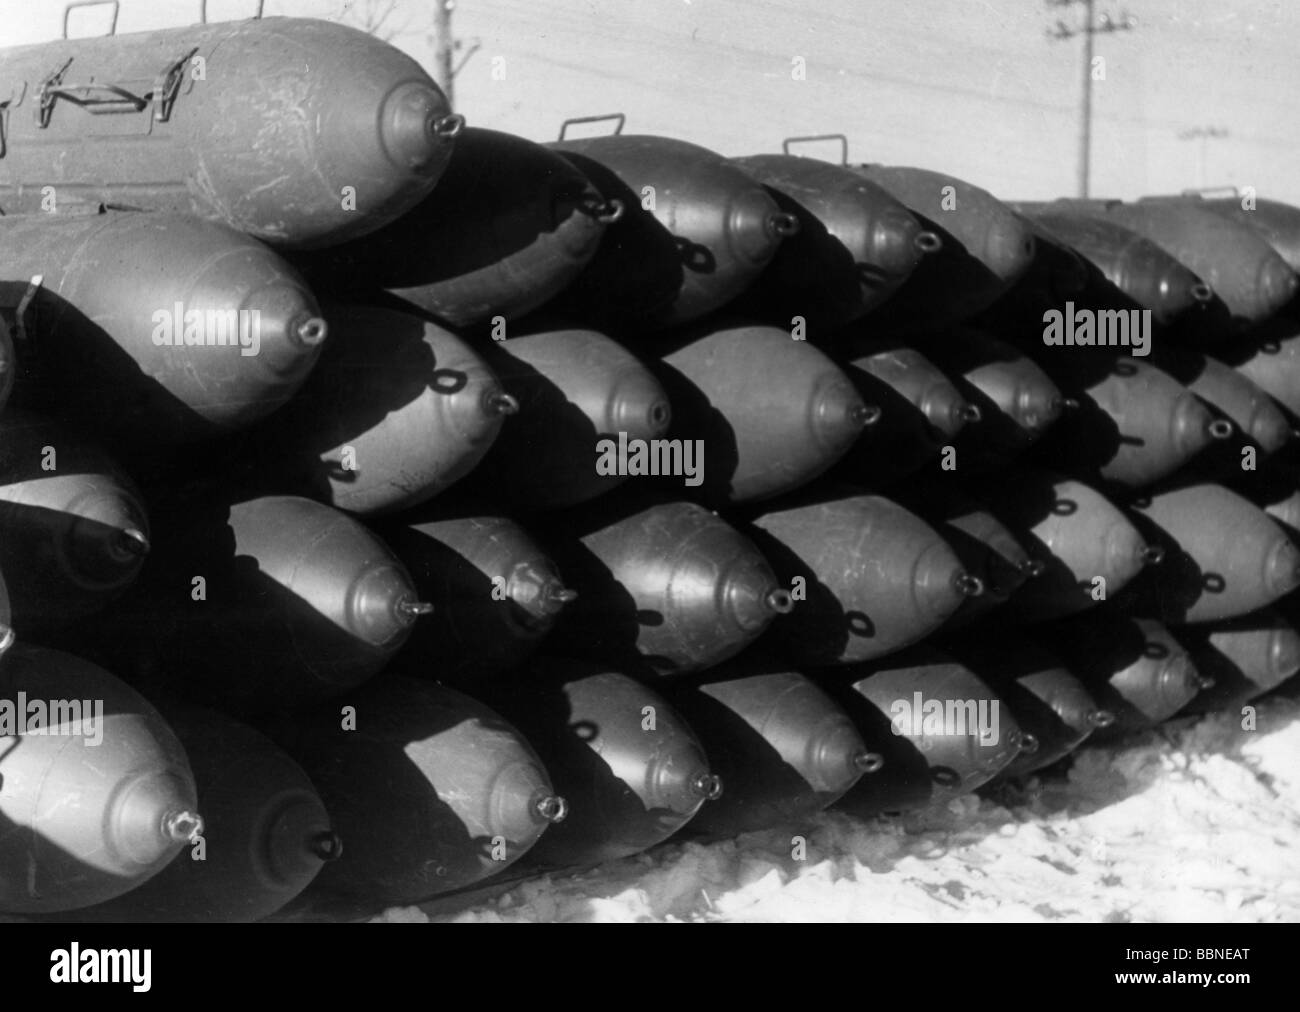 events, Second World War / WWII, aerial warfare, bombs / bombings, stack of German aerial delivery units, Stalino, Russia, February 1943, Stock Photo